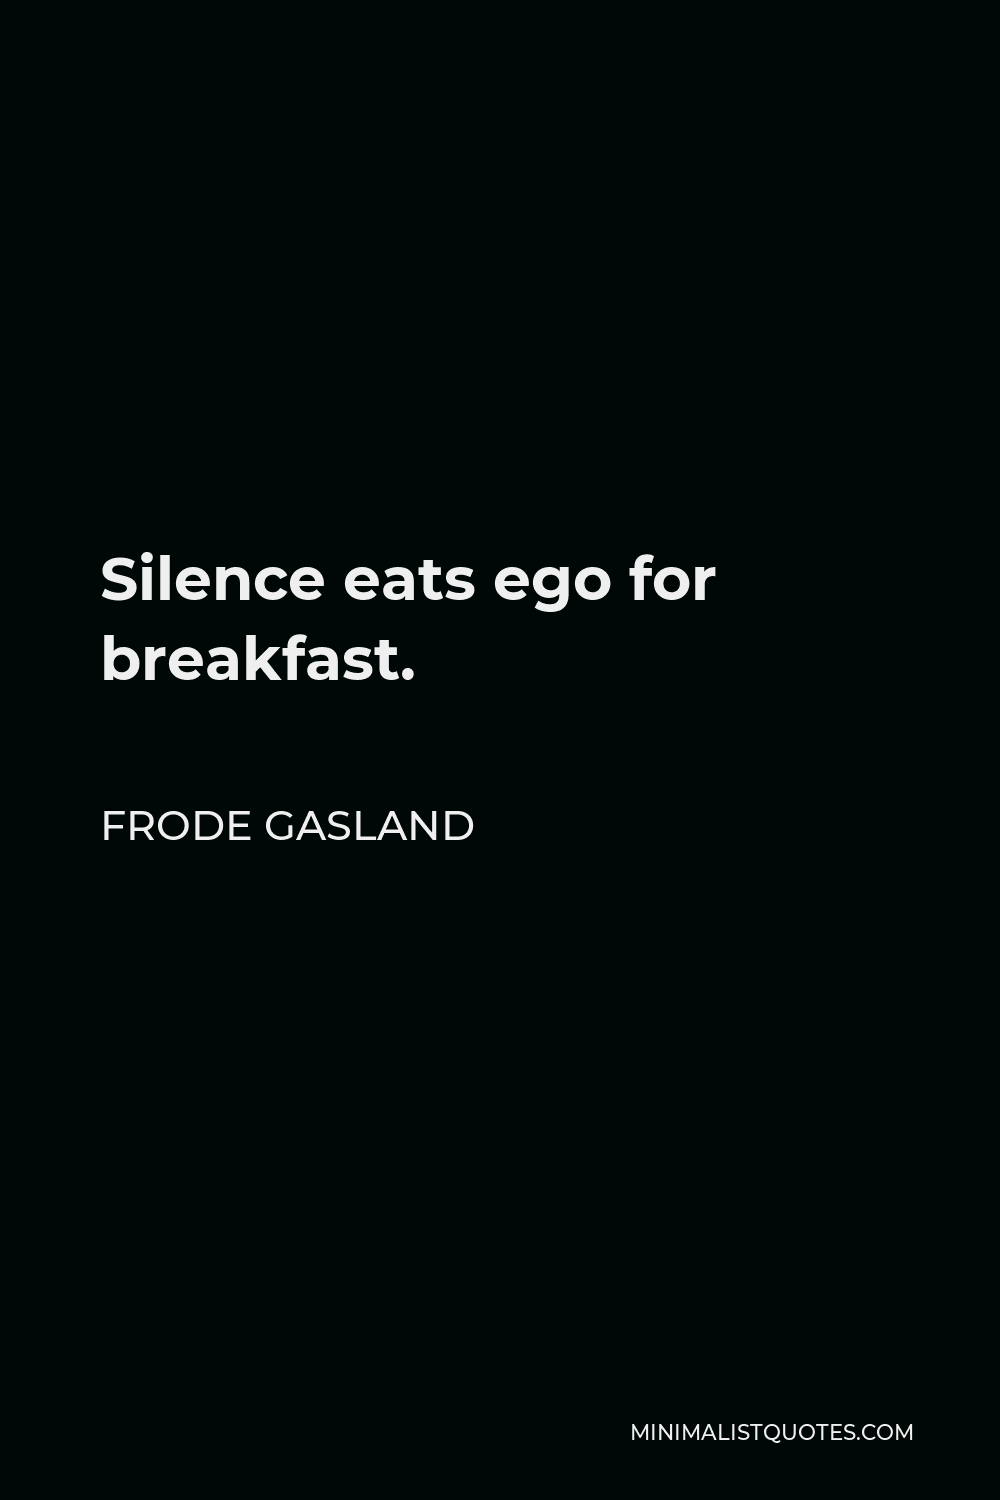 Frode Gasland Quote - Silence eats ego for breakfast.